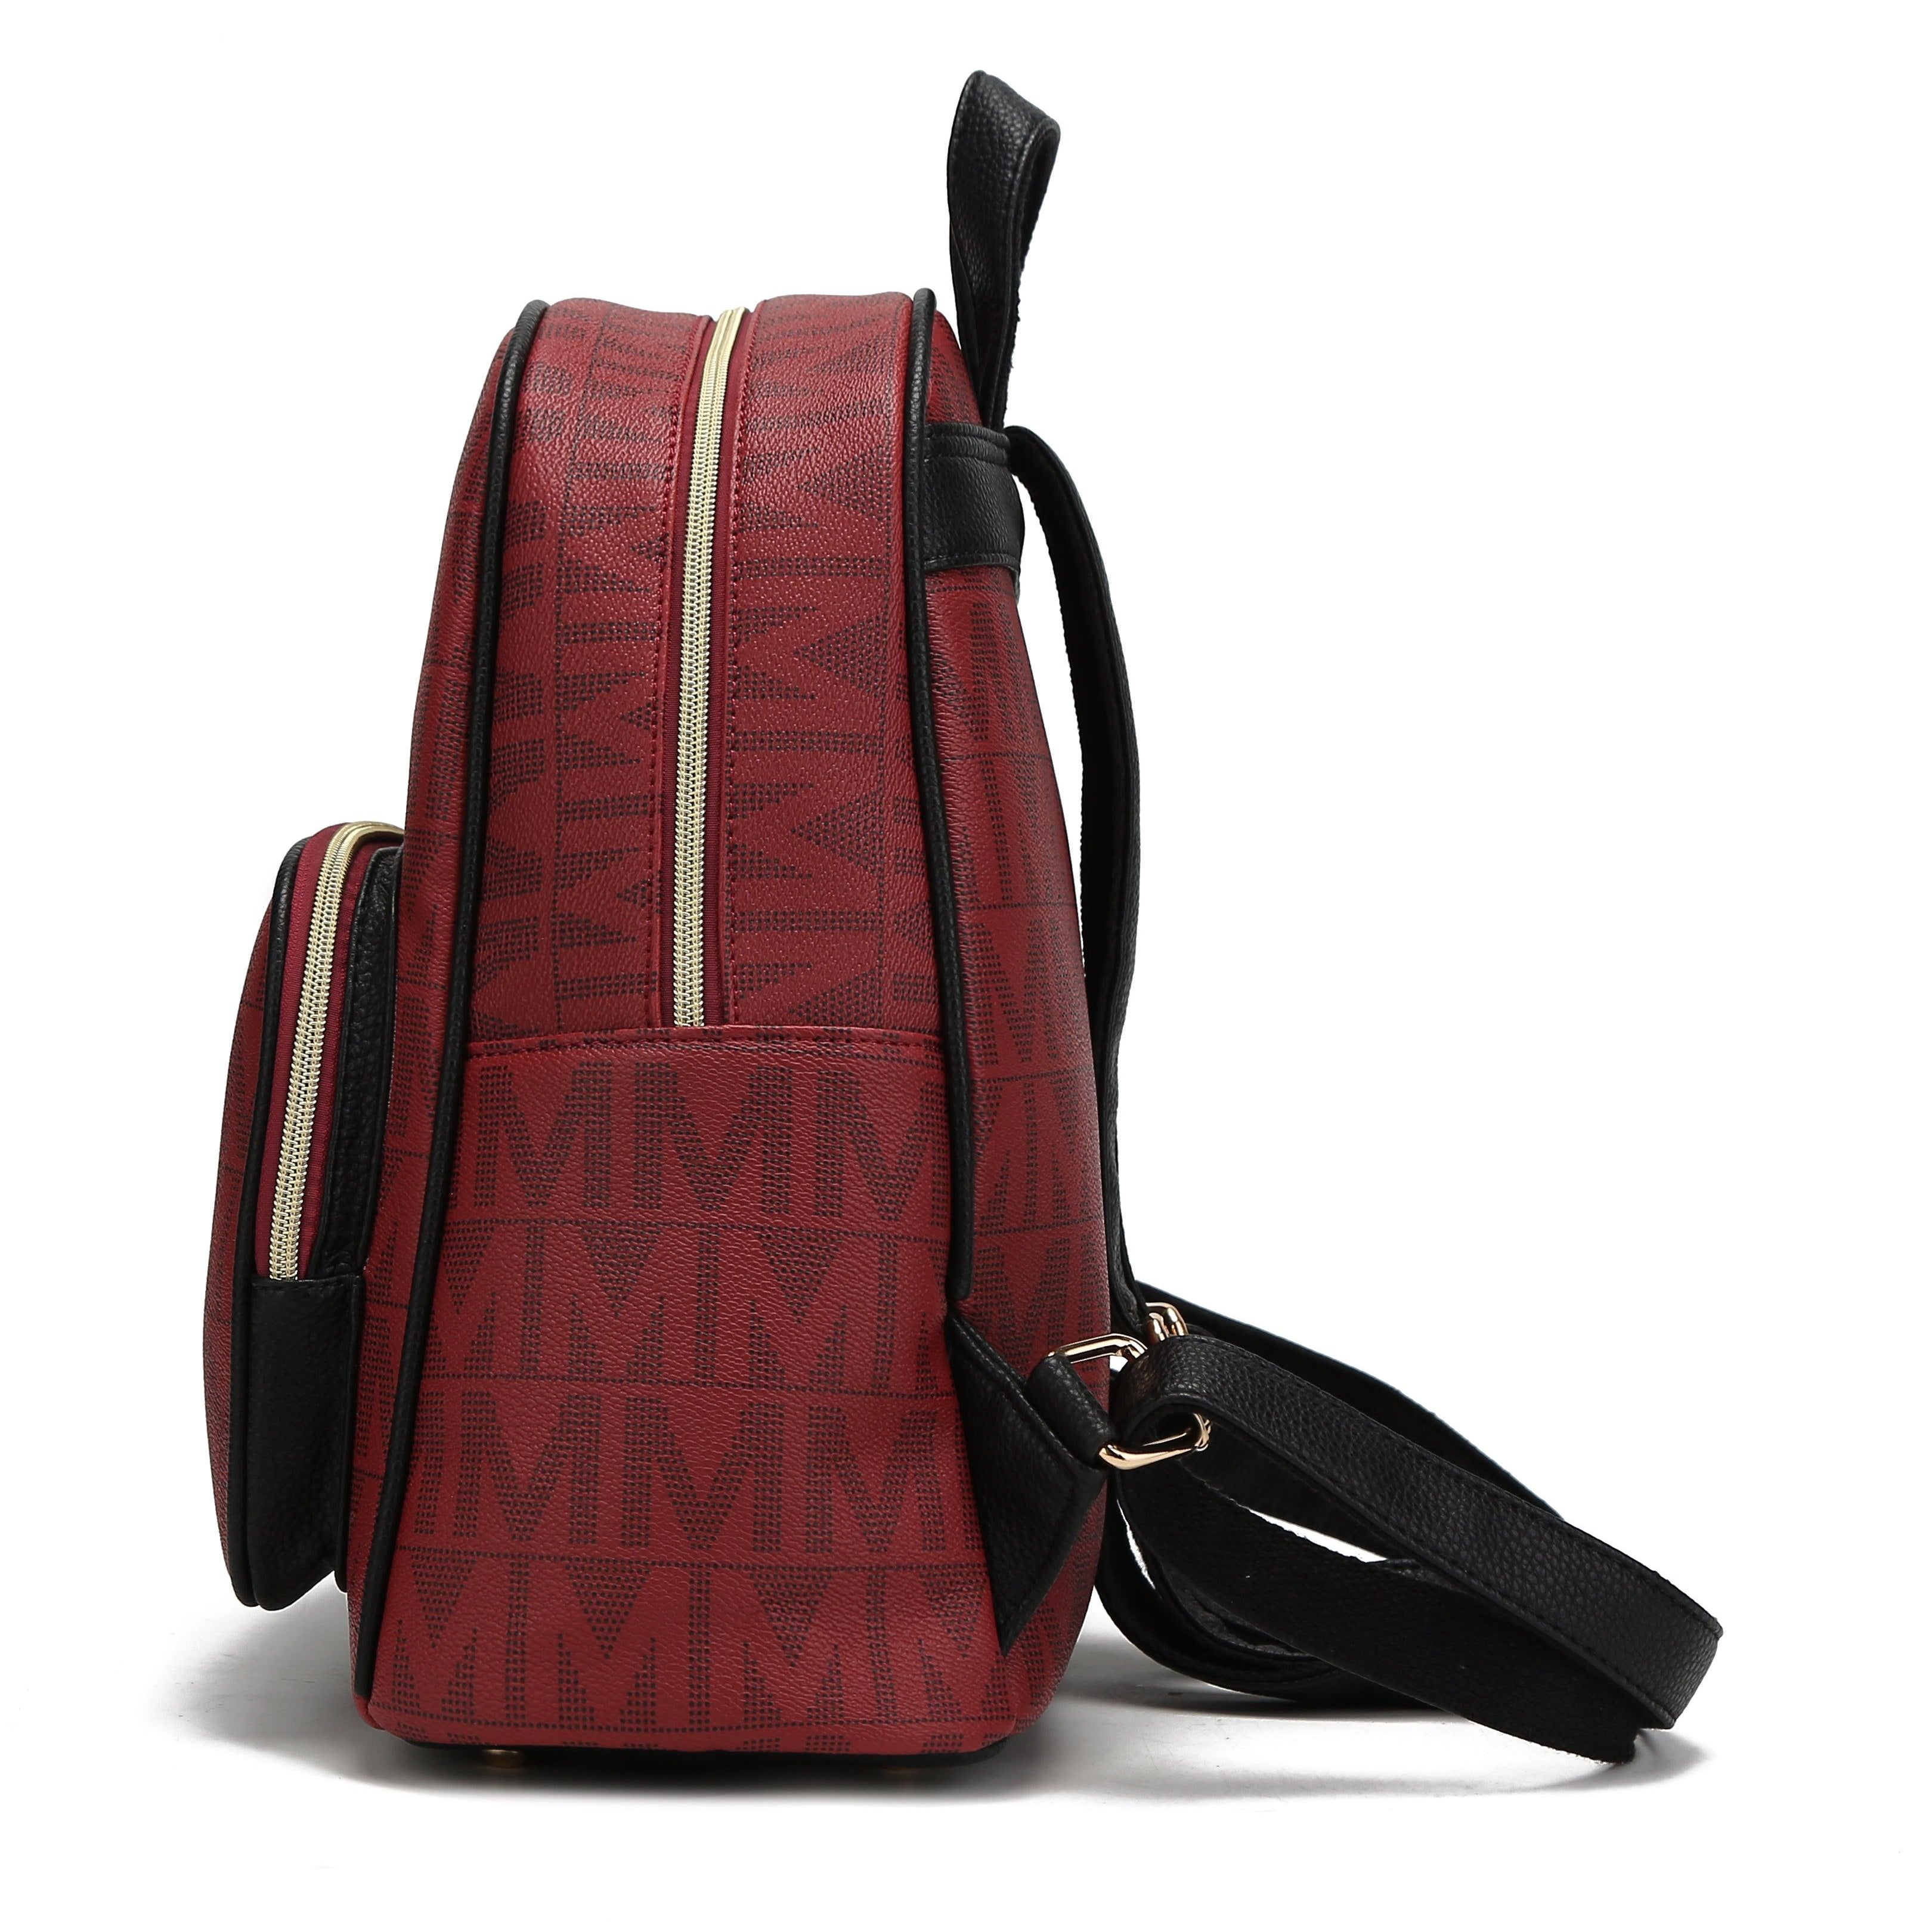 Luggage & Bags - Backpacks Fanny Signature Backpack